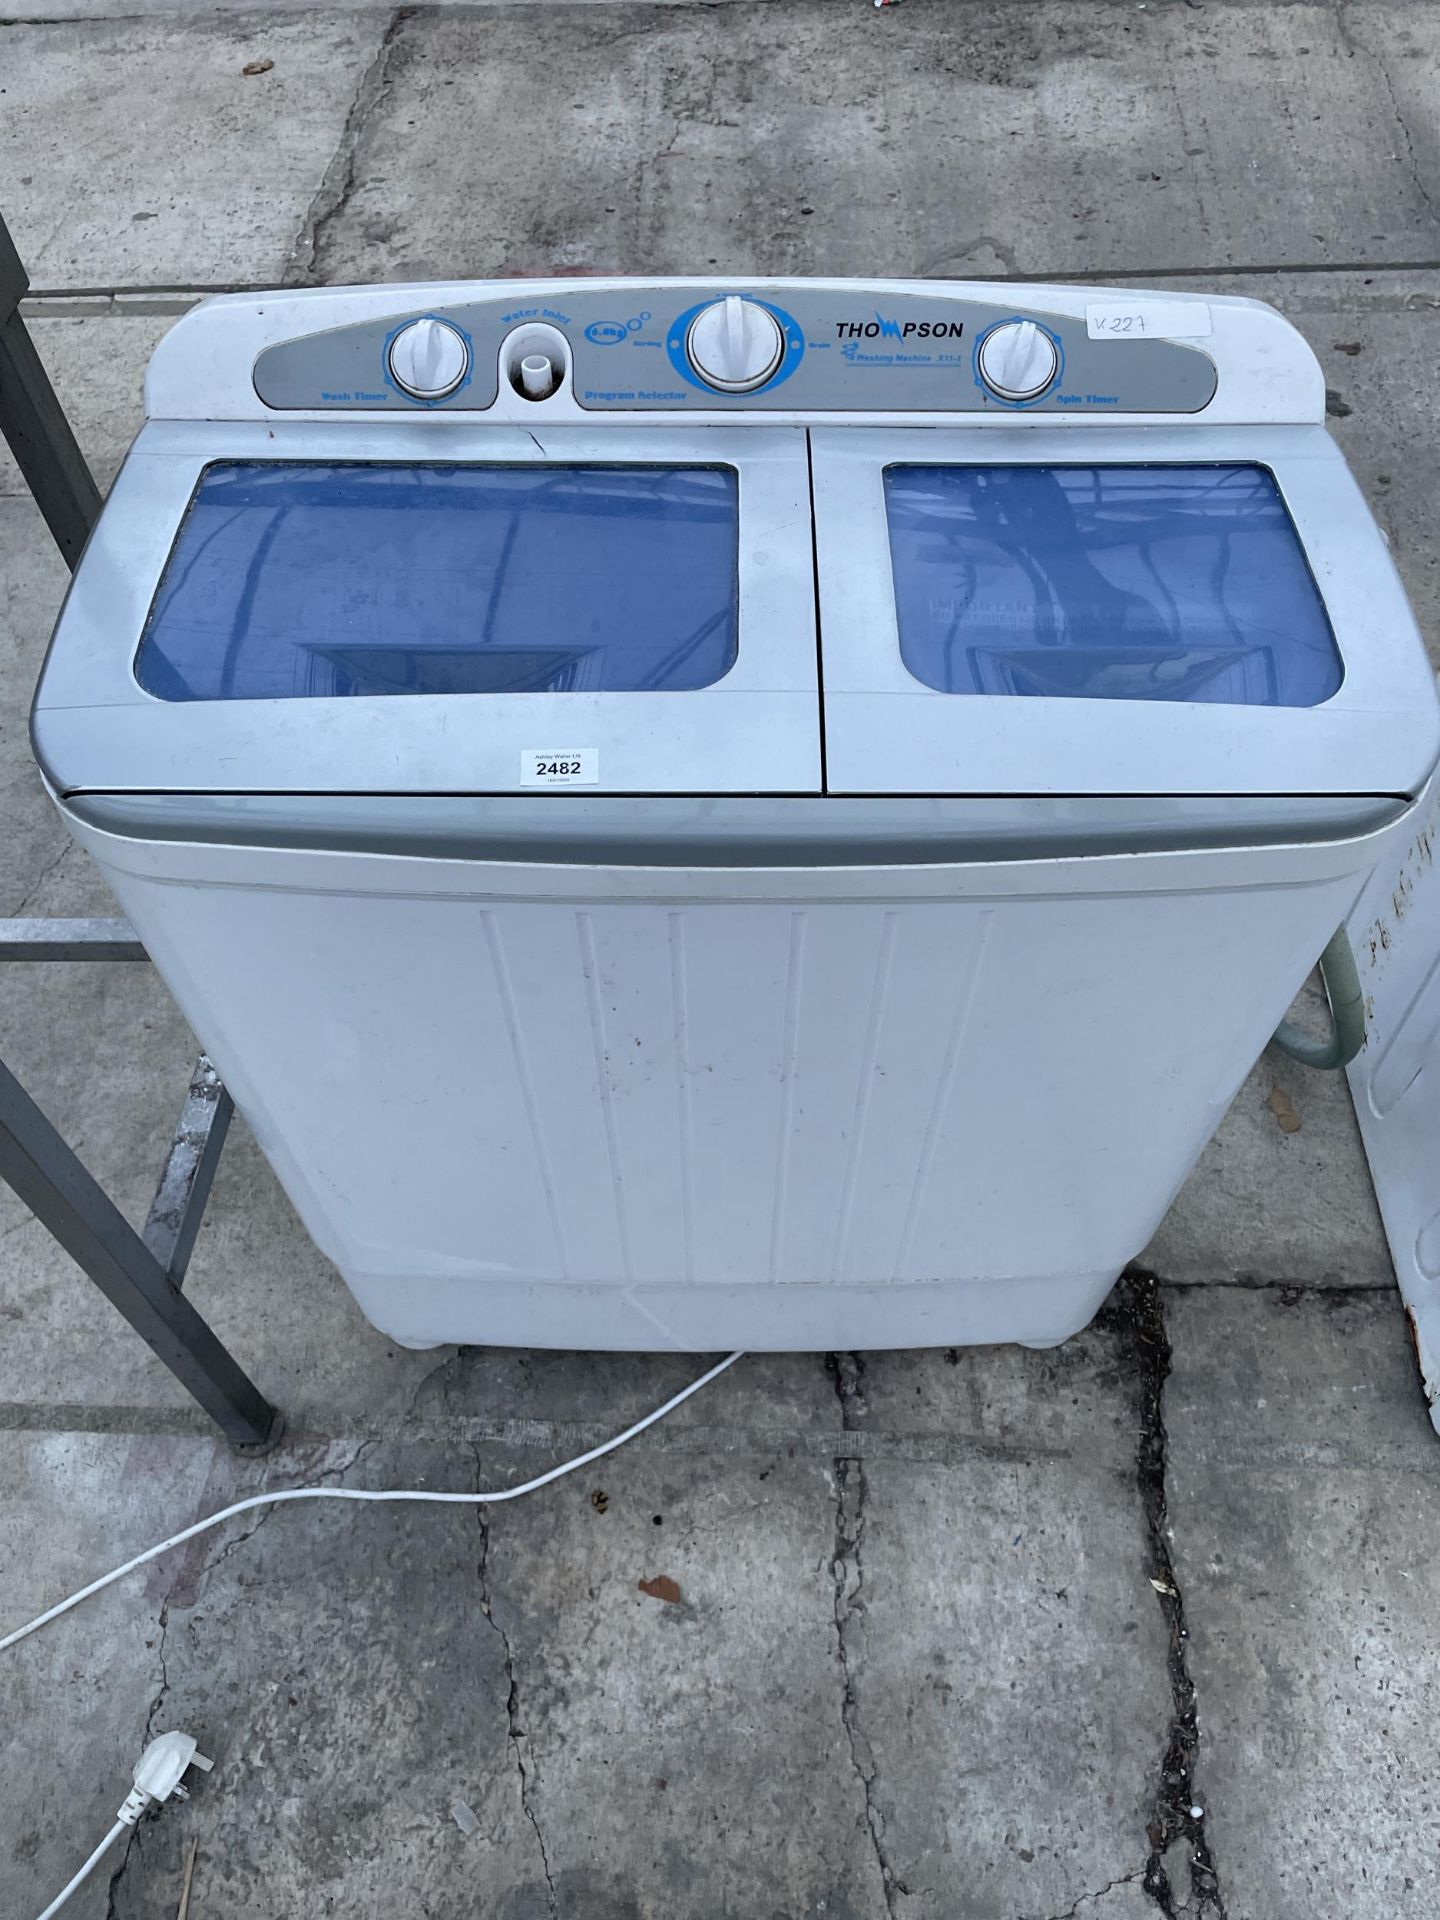 A THOMPSON COMBINATION WASHER AND SPIN DRYER